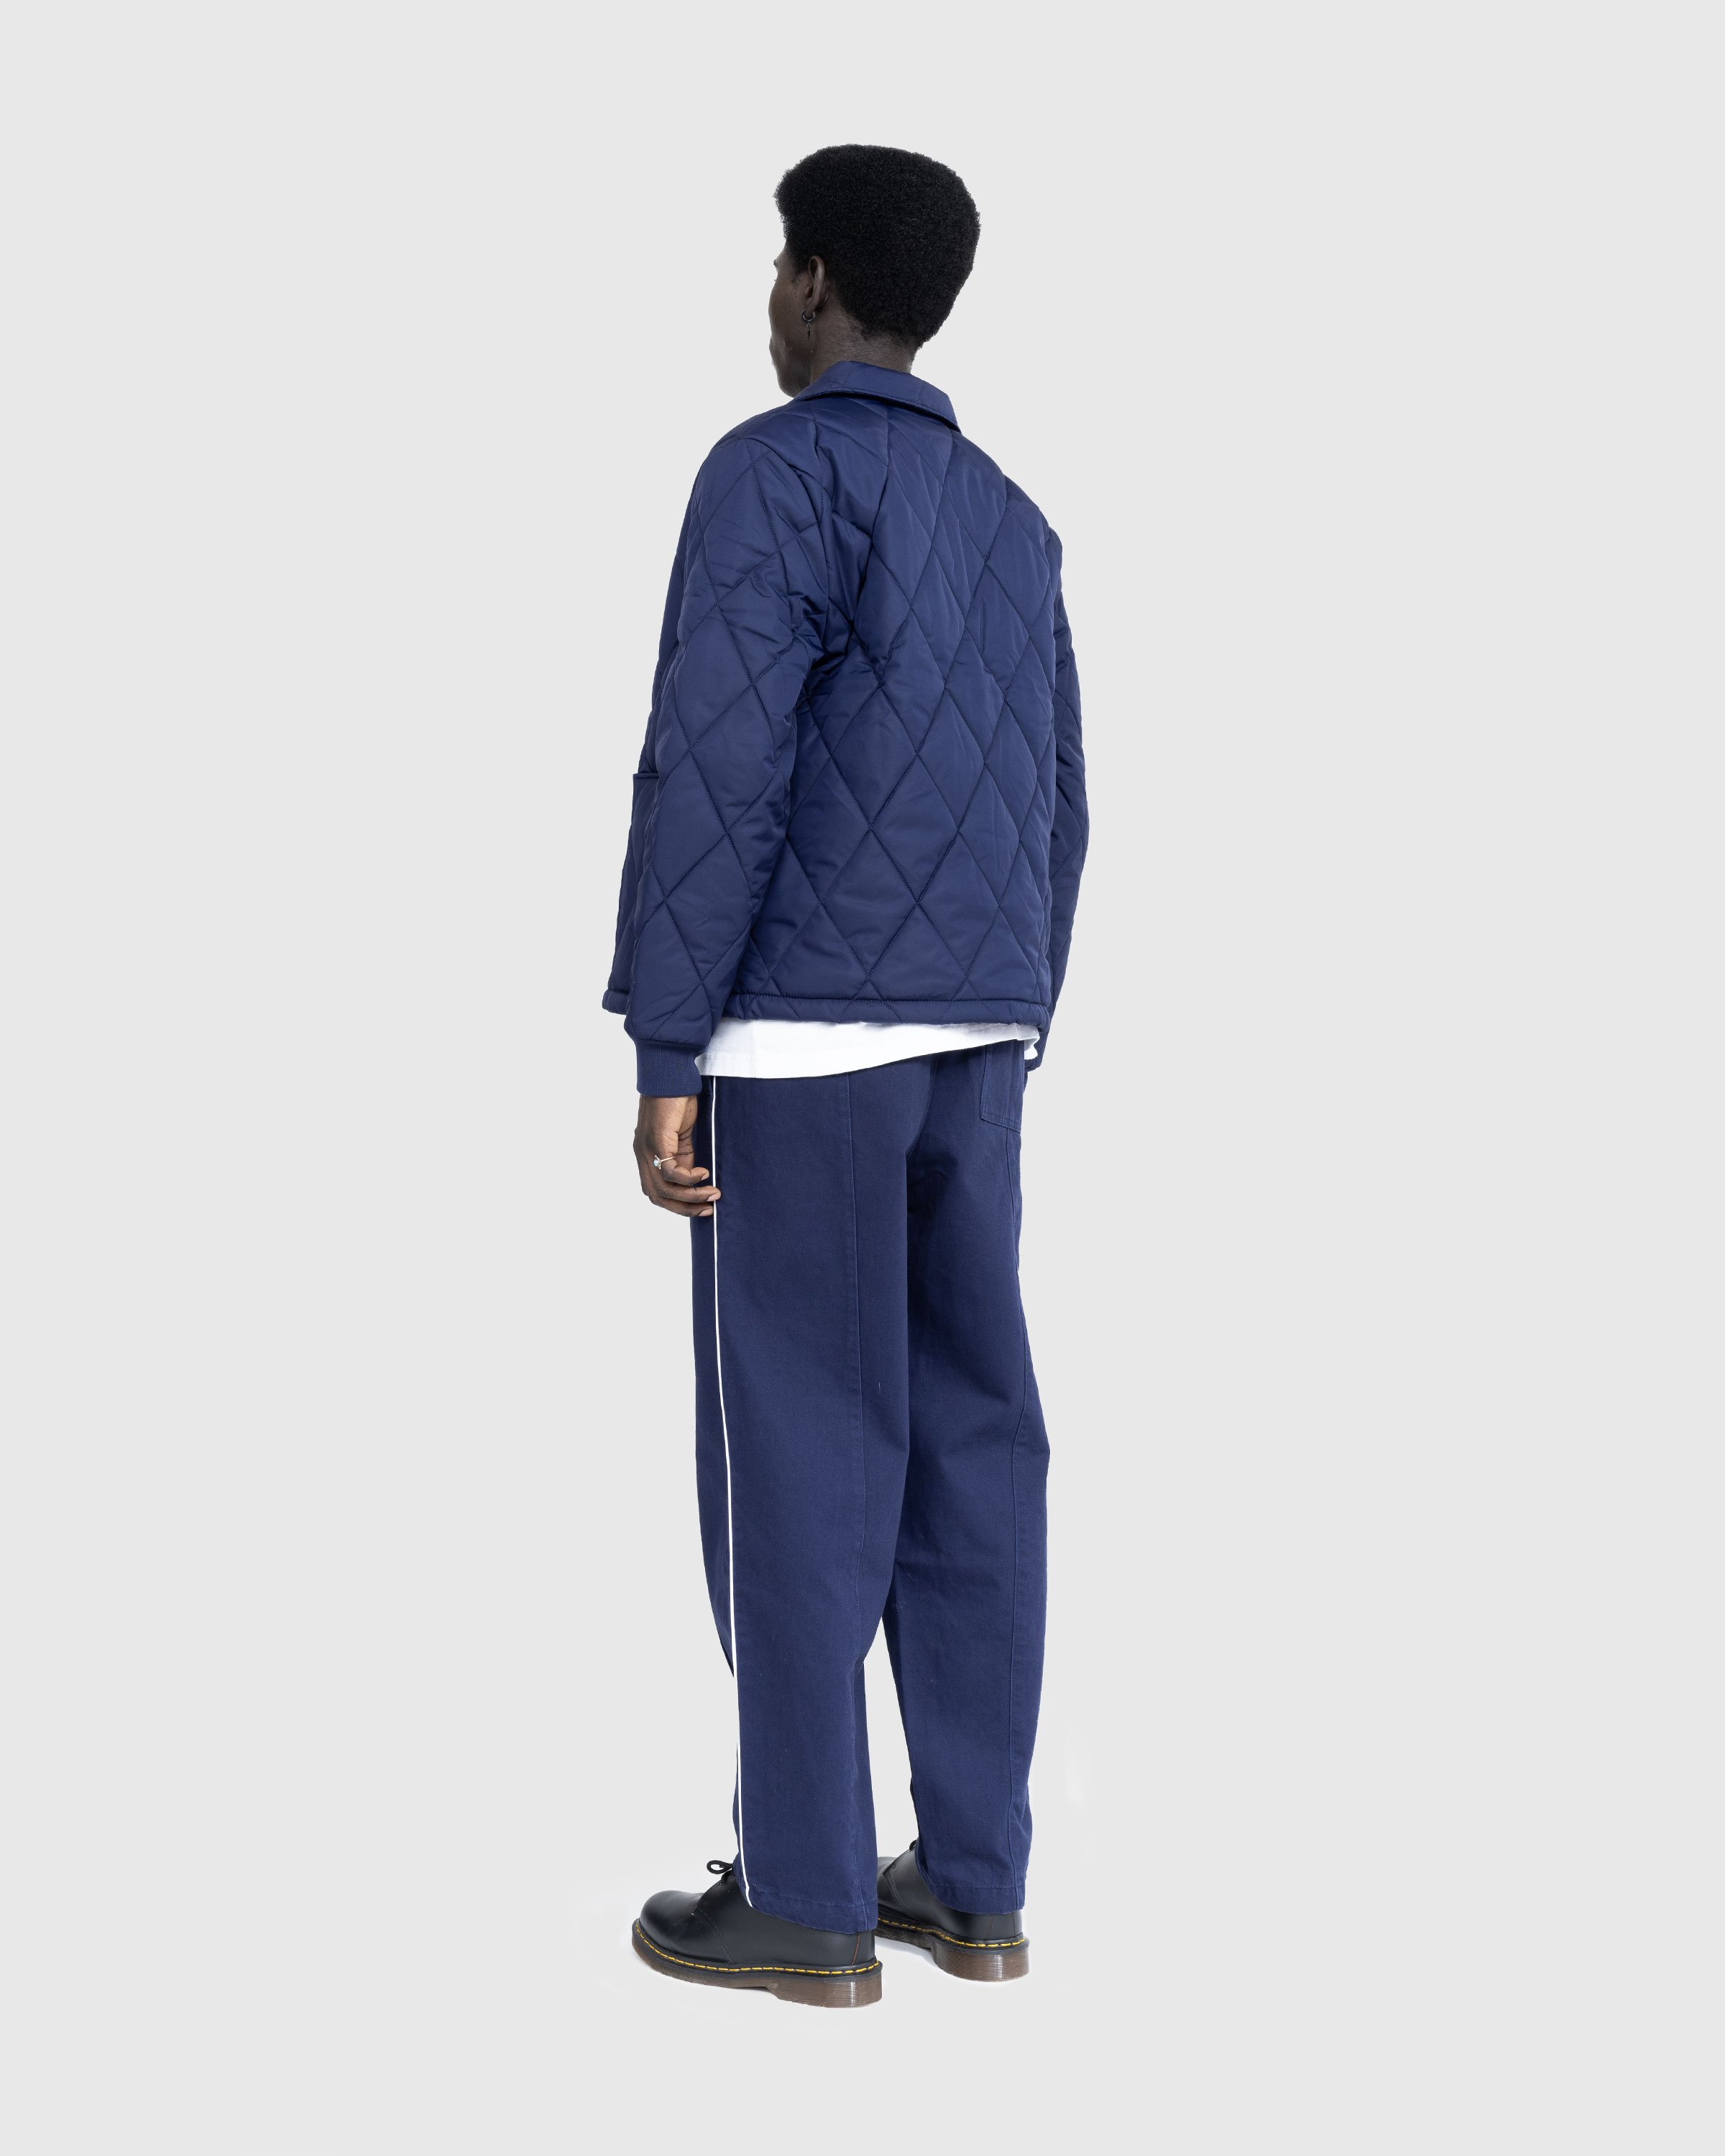 Puma x Noah - Water-Repellent Quilted Jacket Navy - Clothing - Blue - Image 3